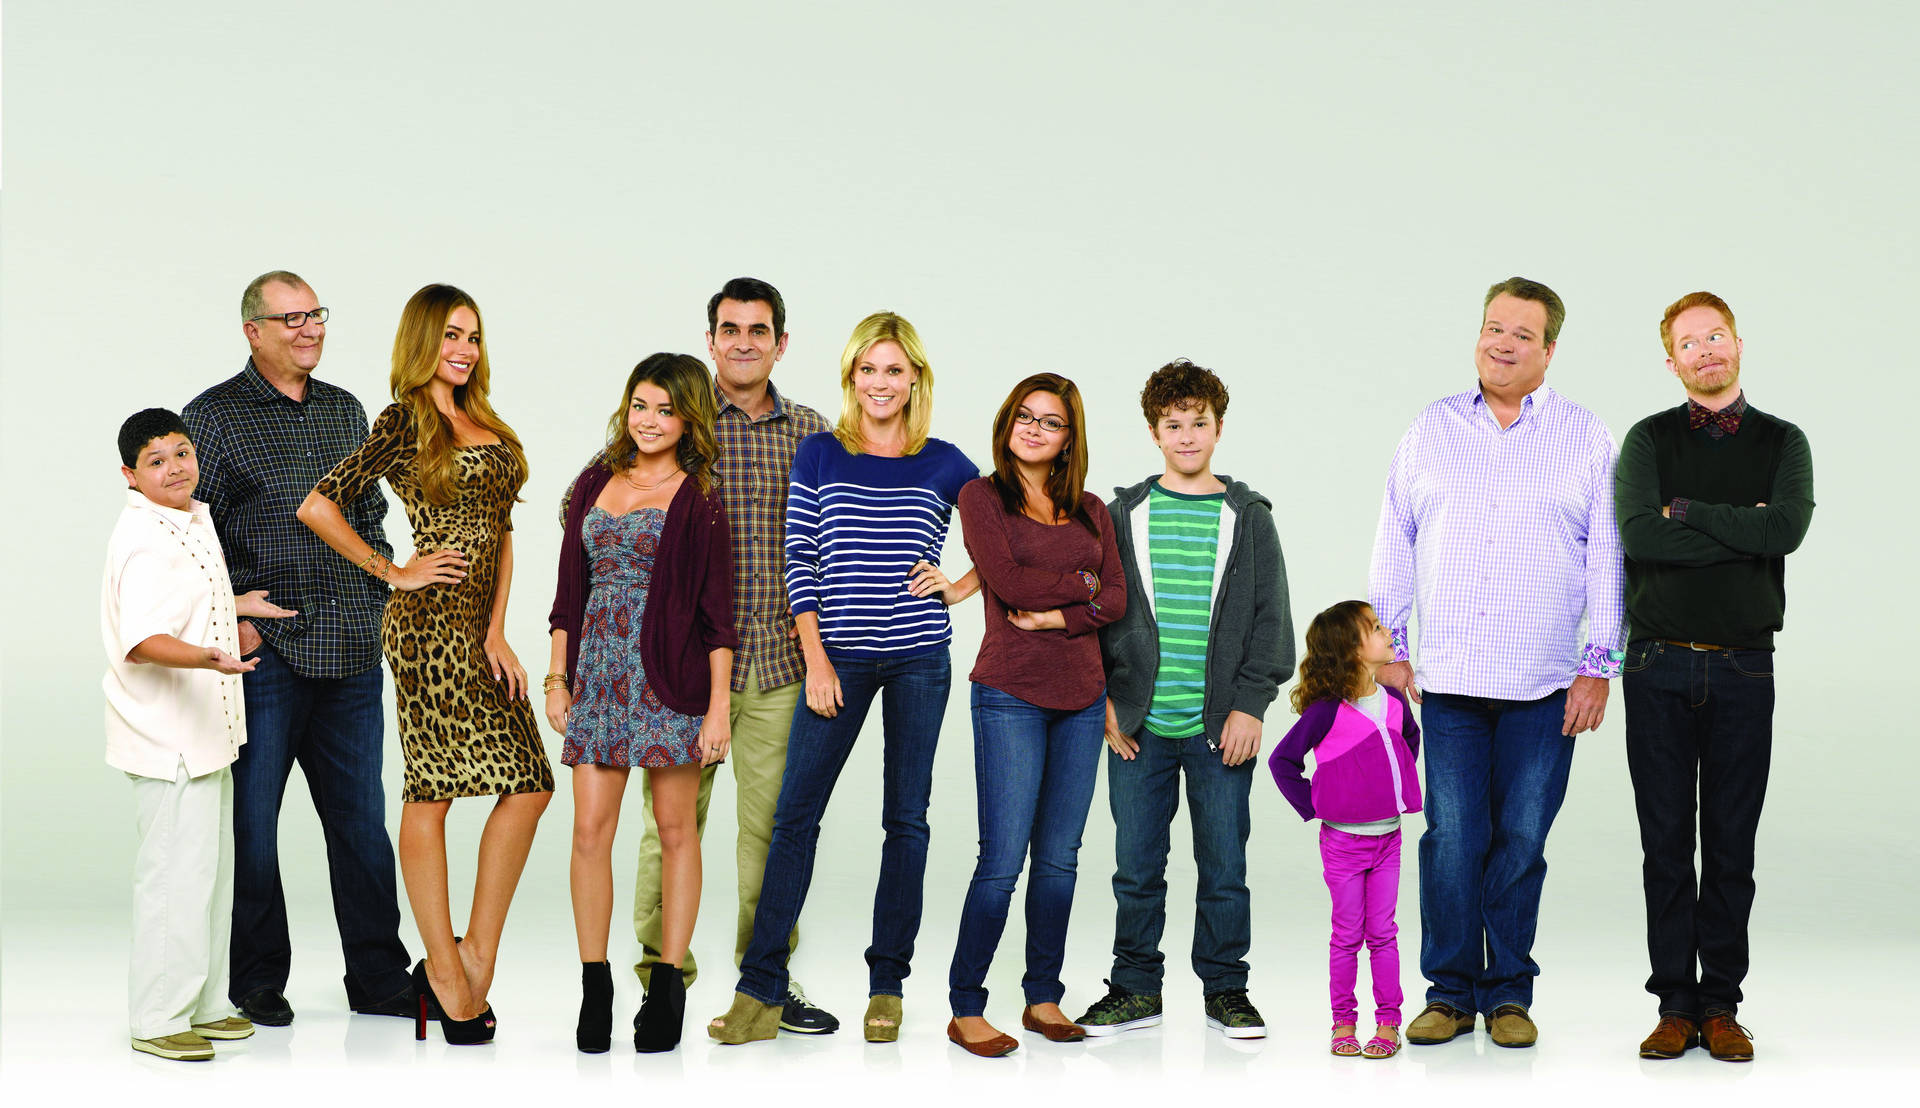 The Dunphy Family Brings Its Unique Brand Of Comedy To Abc's Hit Show, Modern Family.